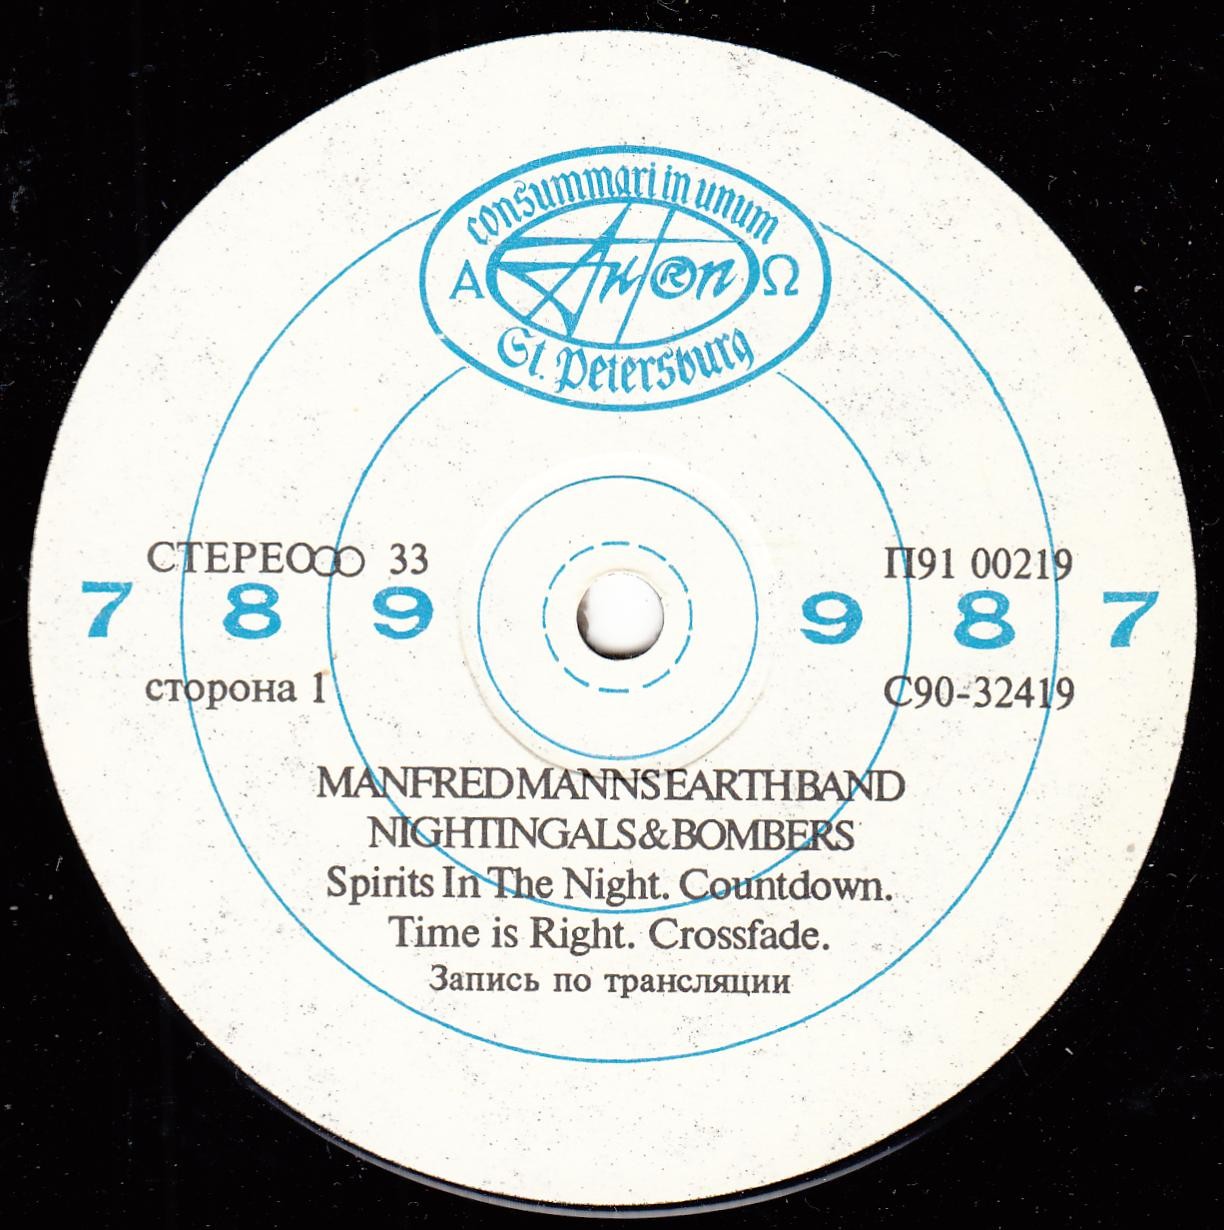 MANFRED MANN'S EARTH BAND. Nightingales & Bombers